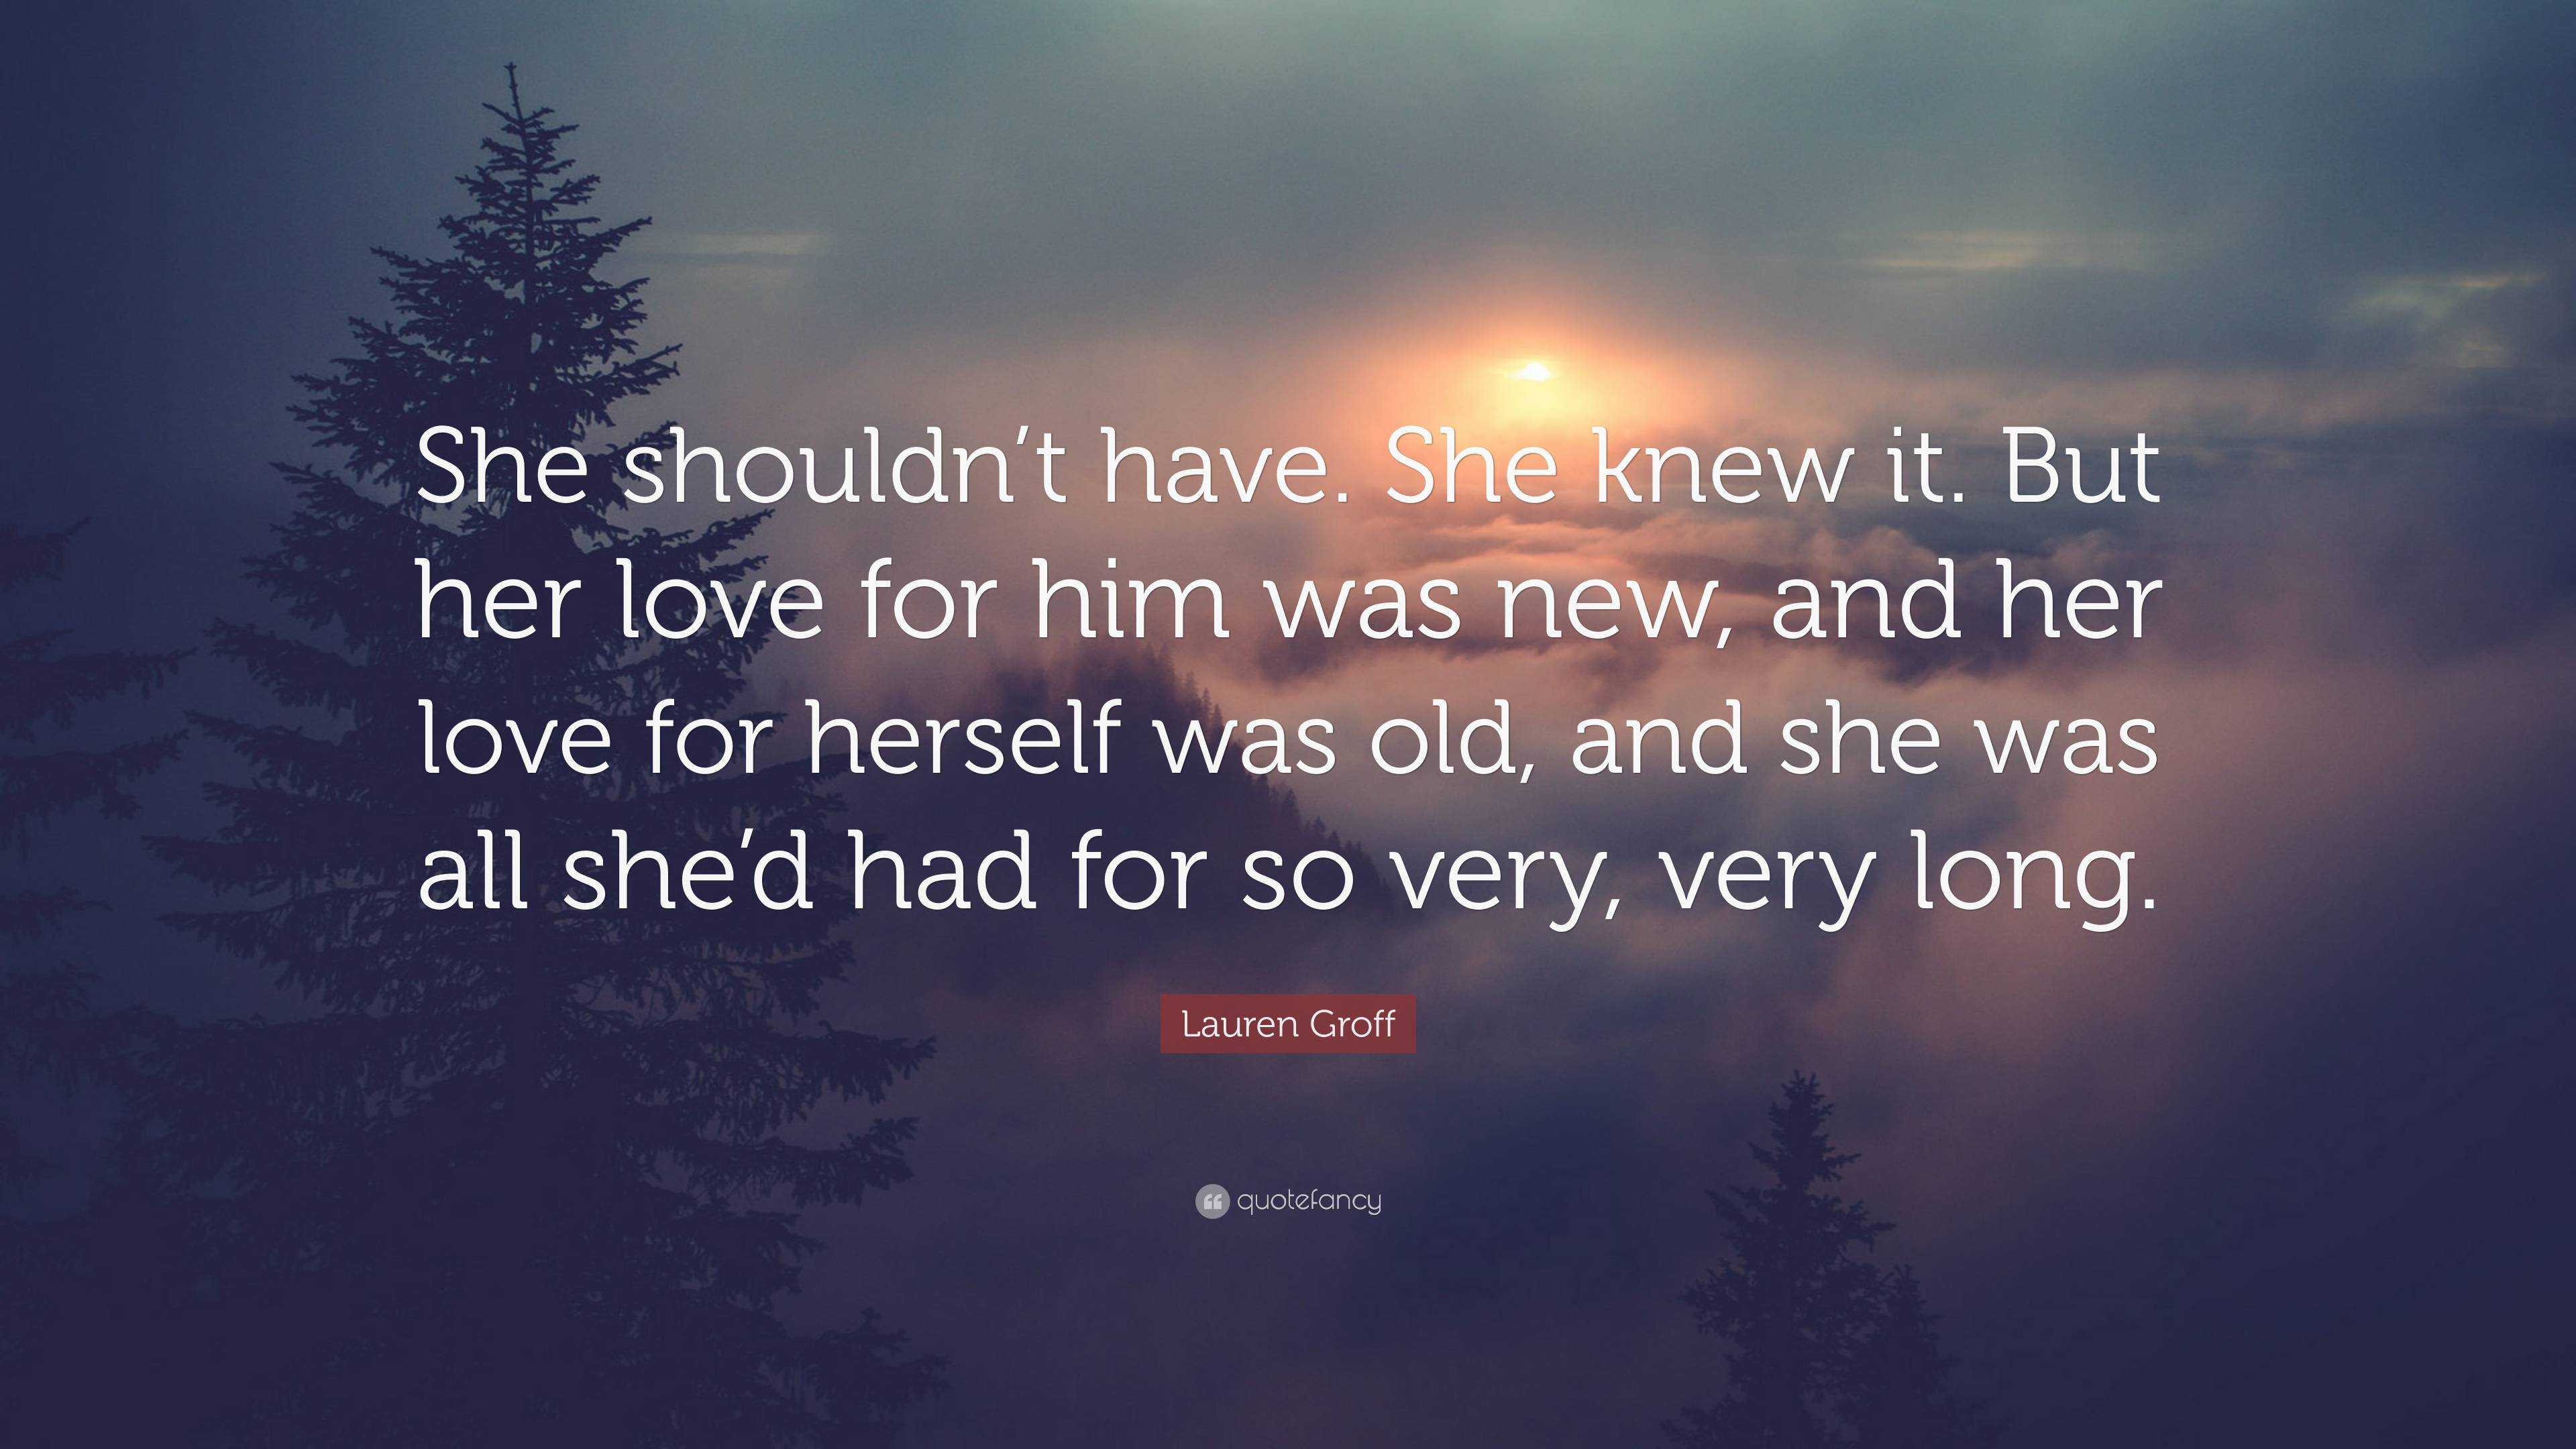 Lauren Groff Quote: “She shouldn’t have. She knew it. But her love for ...